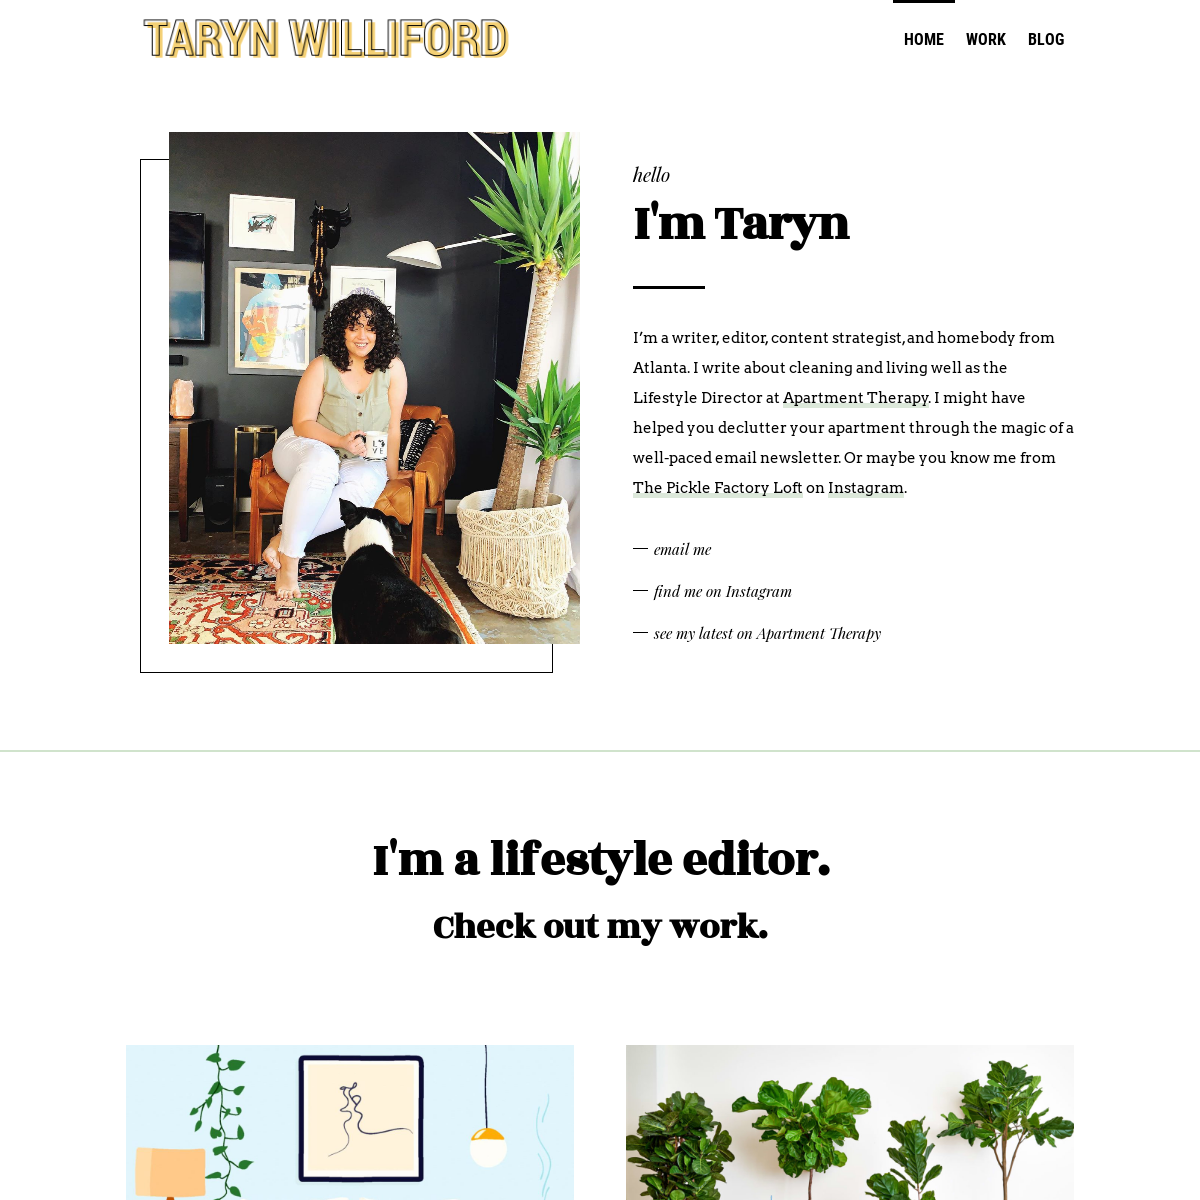 A complete backup of tarynwilliford.com